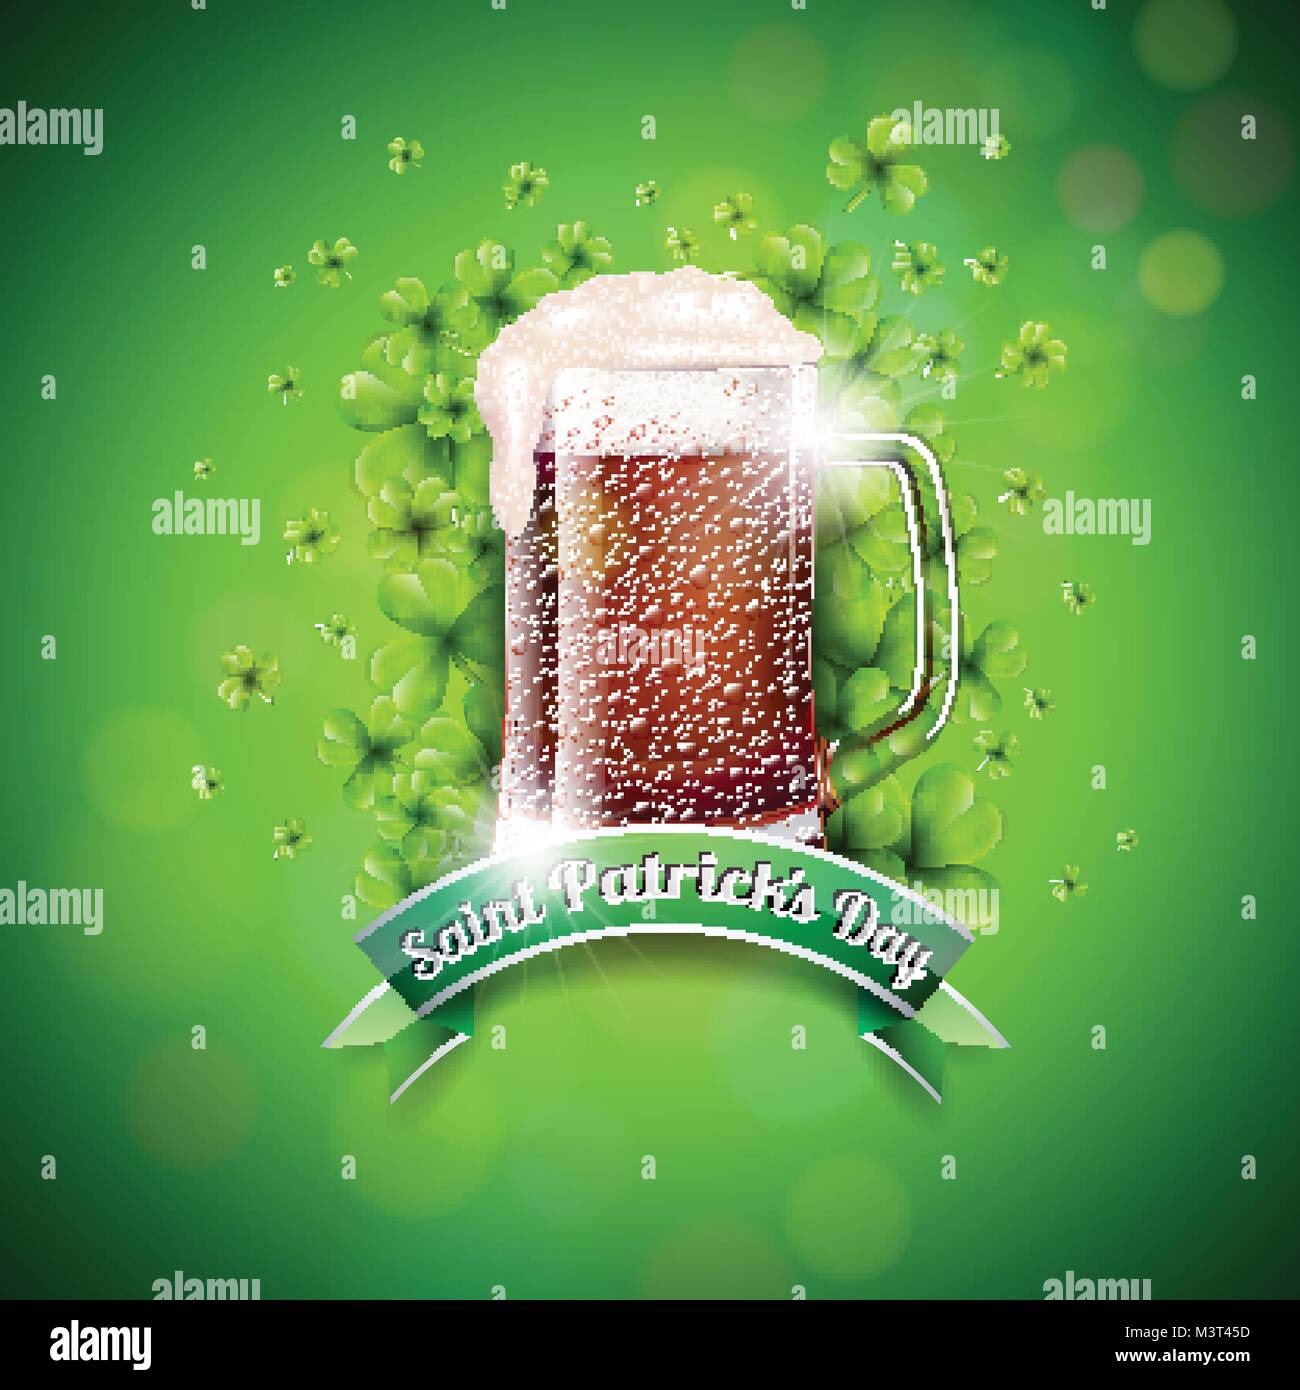 Saint Patricks Day Design with Fresh Dark Beer and Falling Clovers Leaf on Green Background. Irish Holiday Vector Illustration for Greeting Card, Party Invitation or Promo Banner. Stock Vector